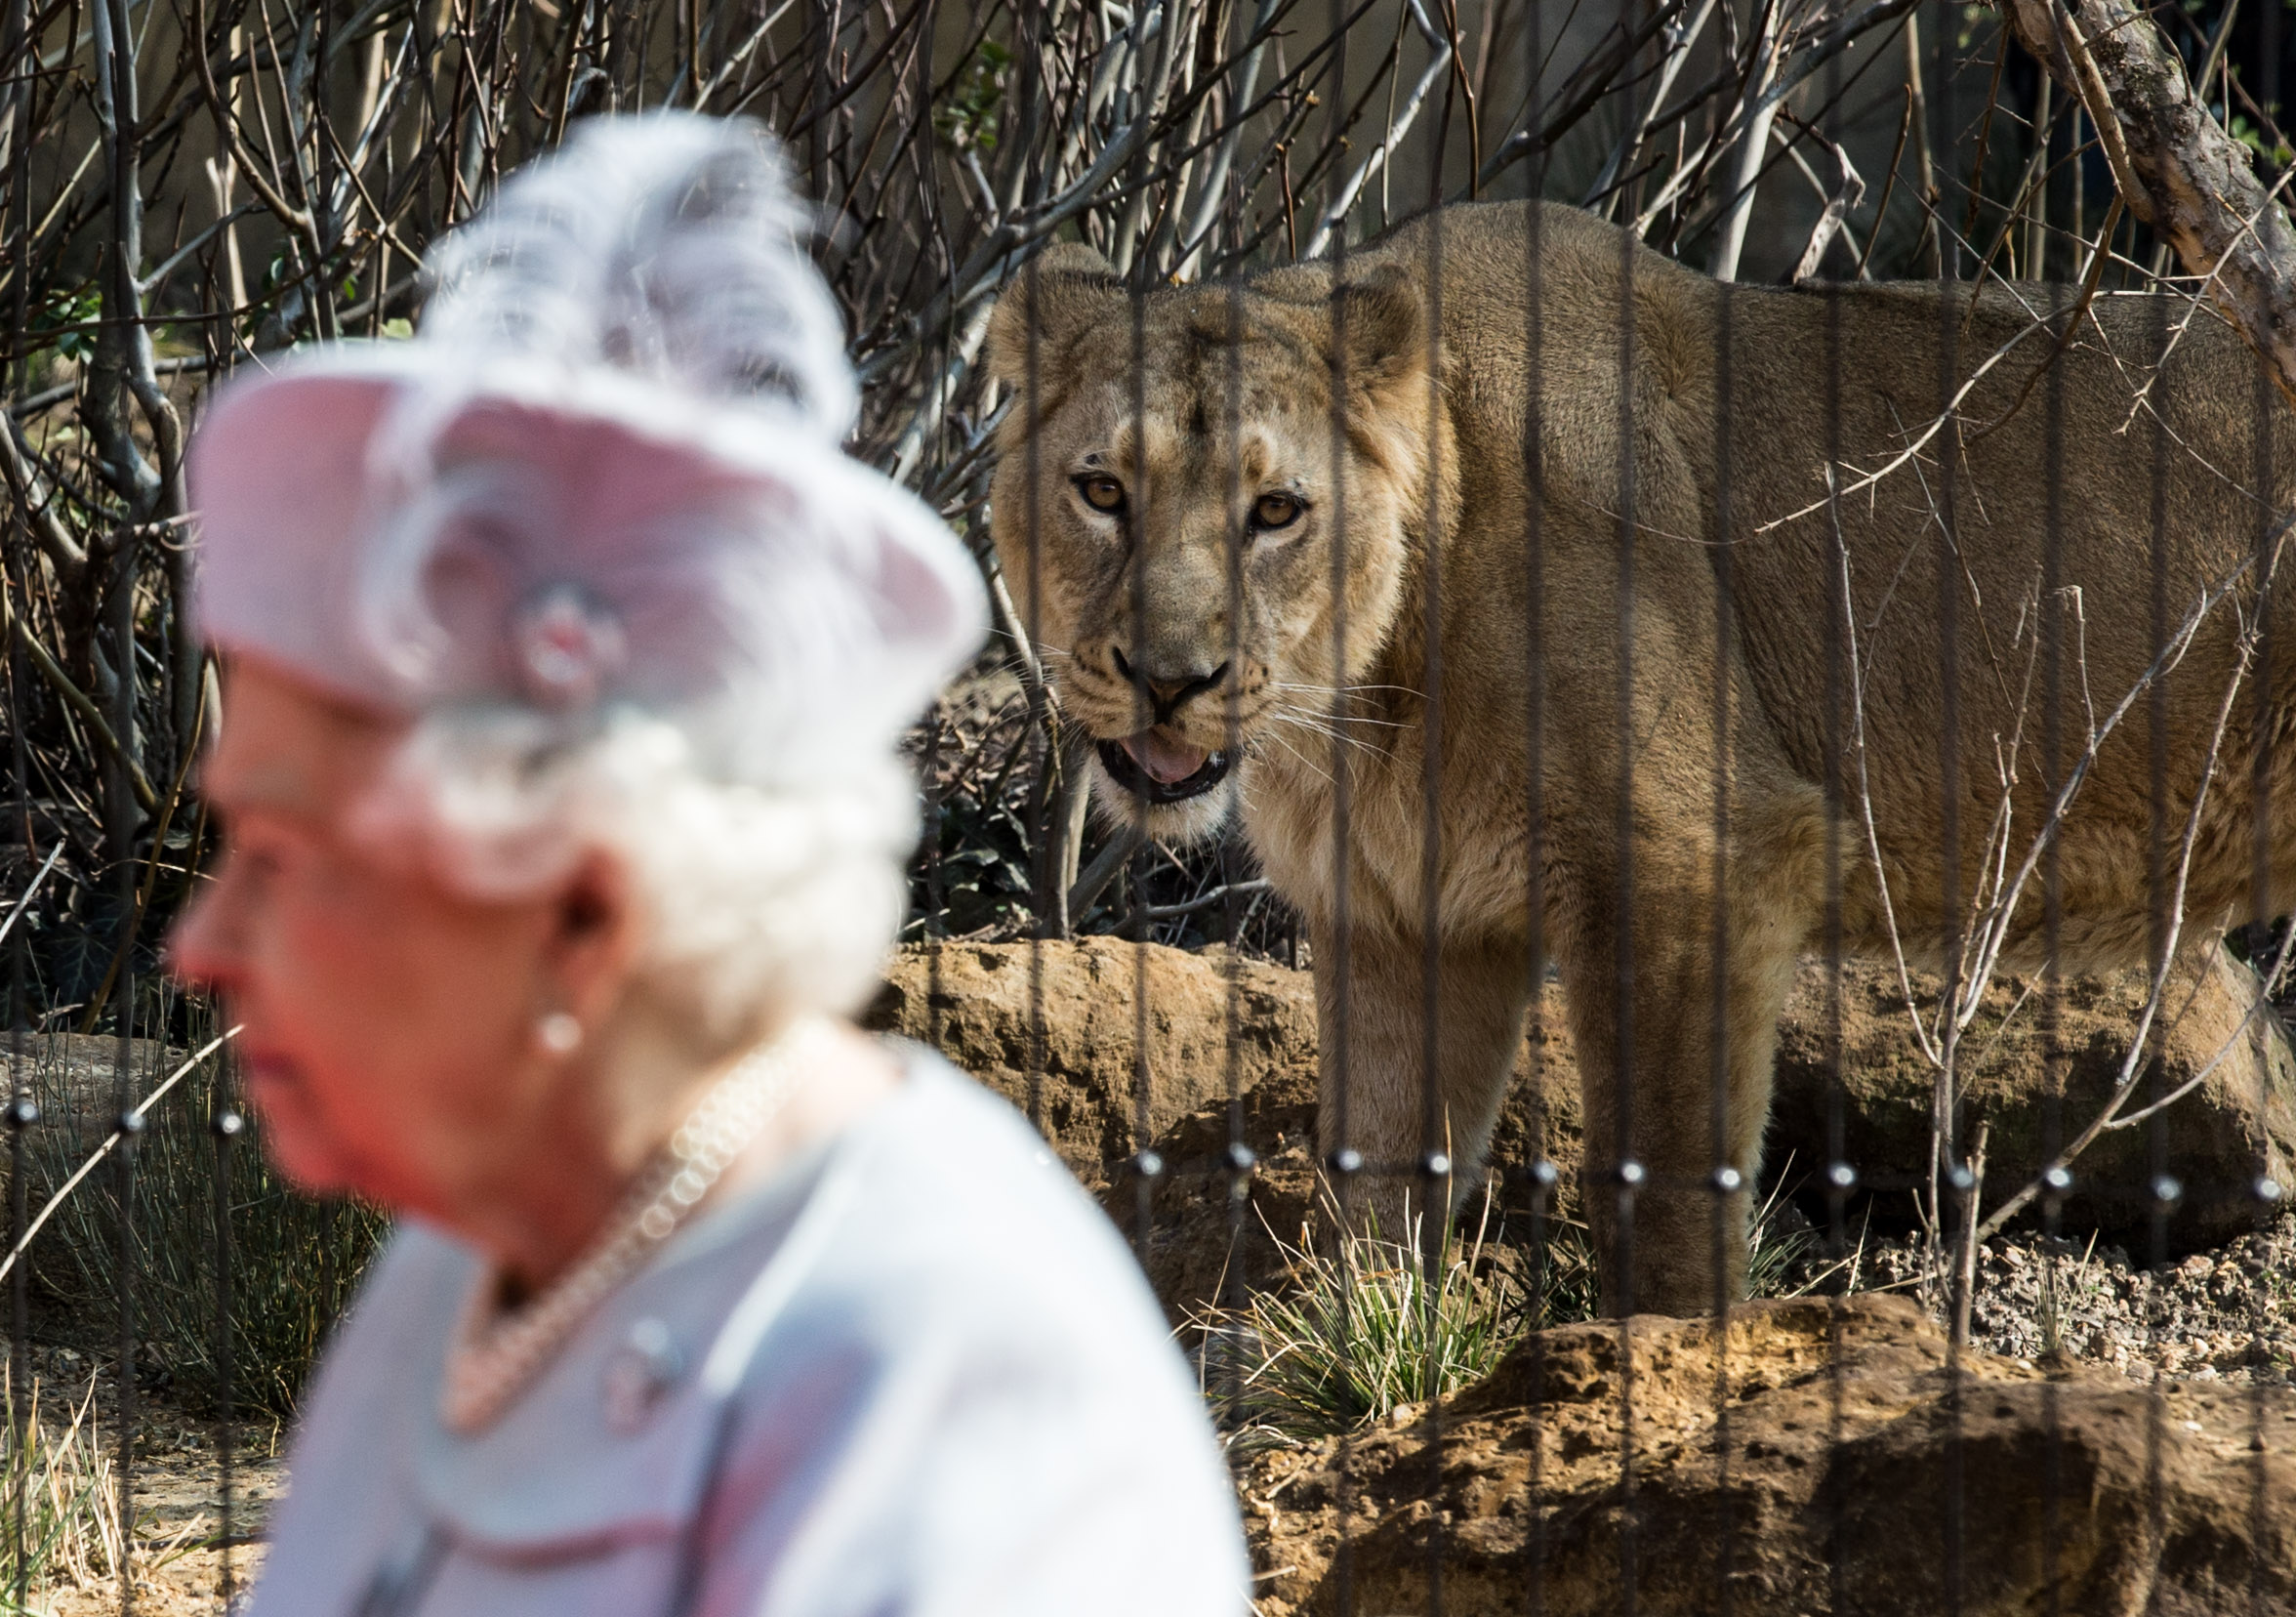  Queen Elizabeth II and an Asiatic Lion at the opening of London Zoo's 'Land of the Lions' 